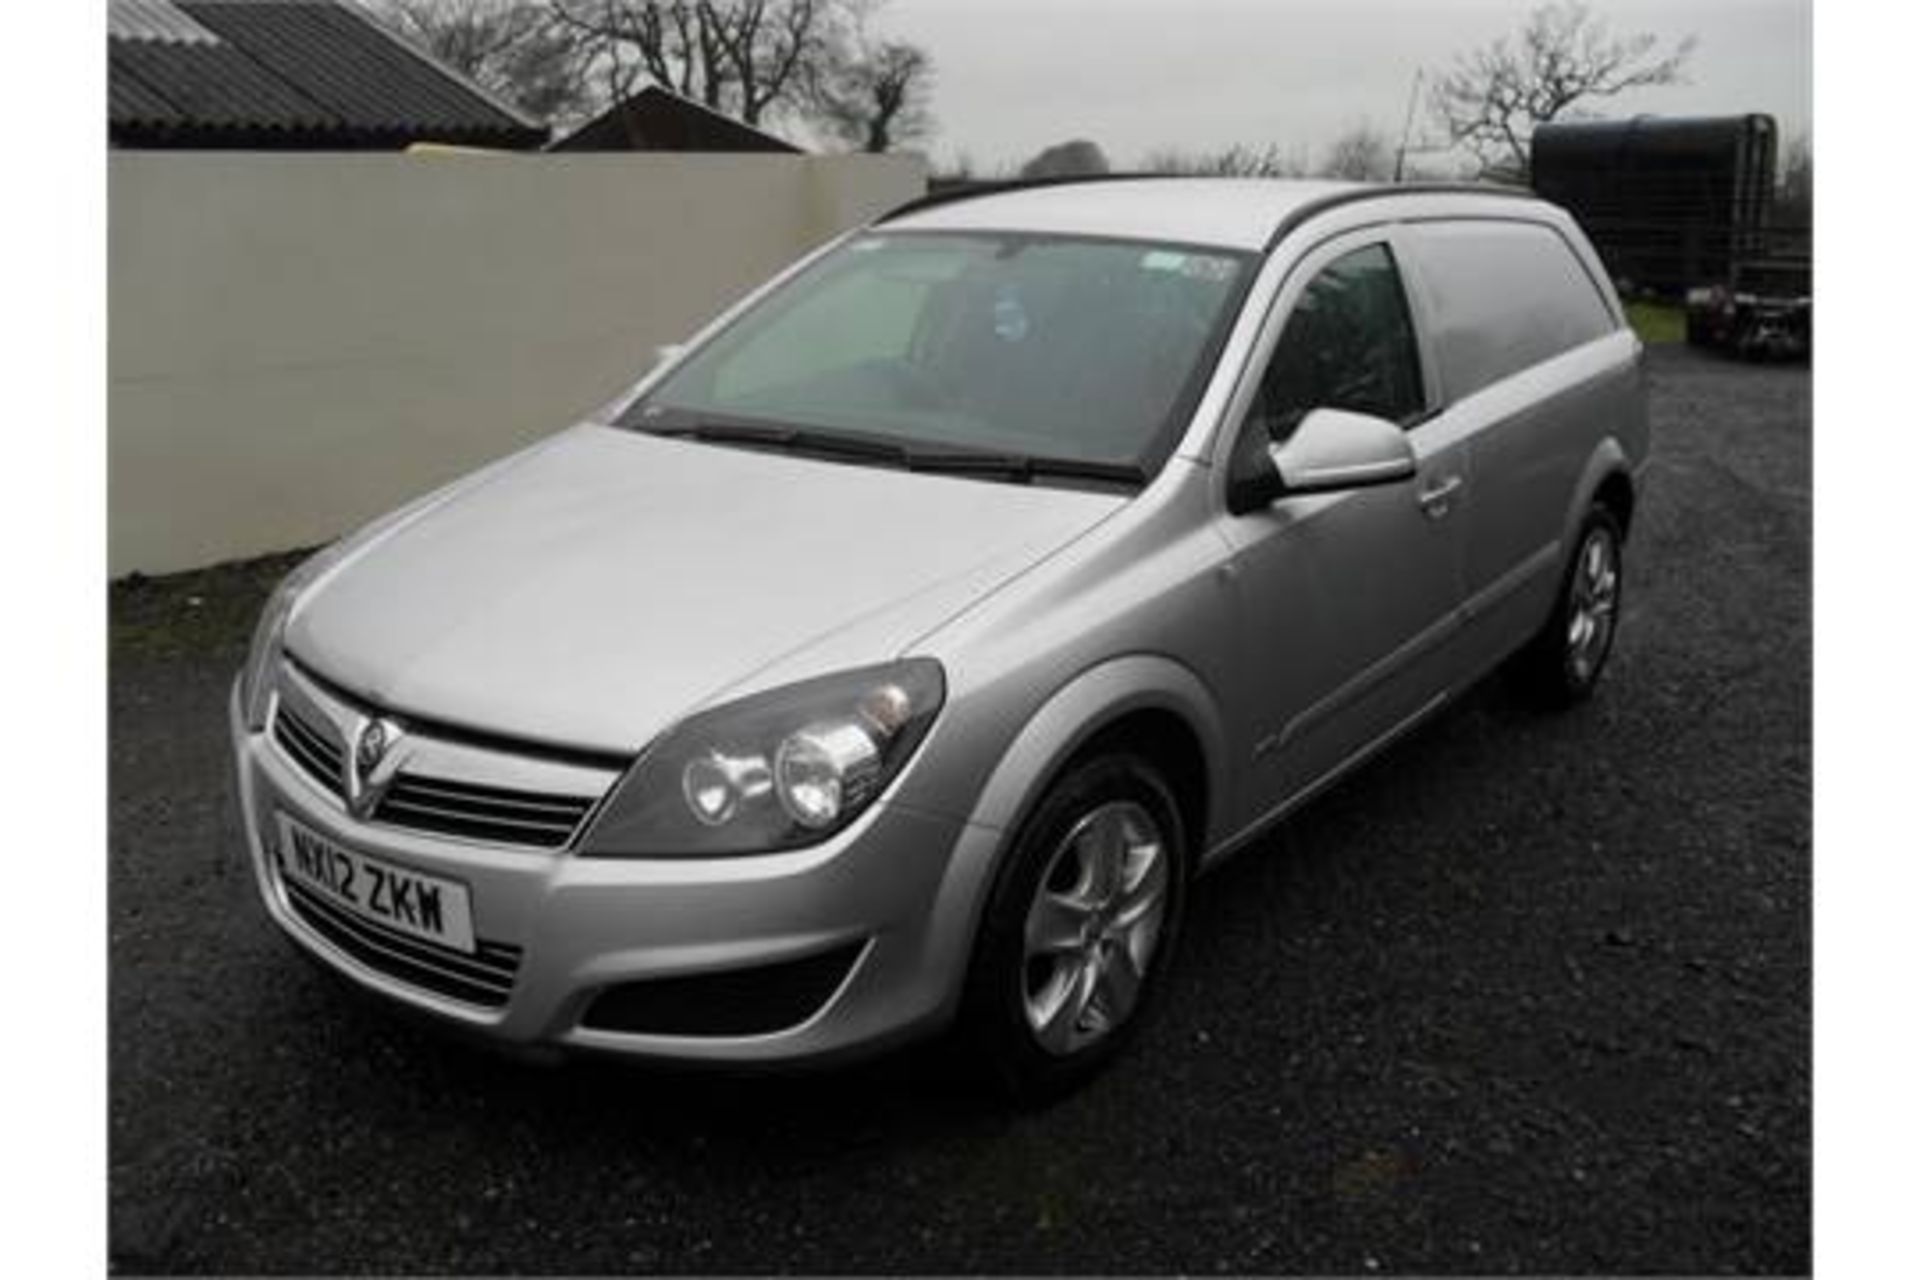 Vauxhall Astravan Sportive 1.7CDTi, Registration No. NX12 ZKW, First Registered: 13/03/12, Test Expi - Image 3 of 6